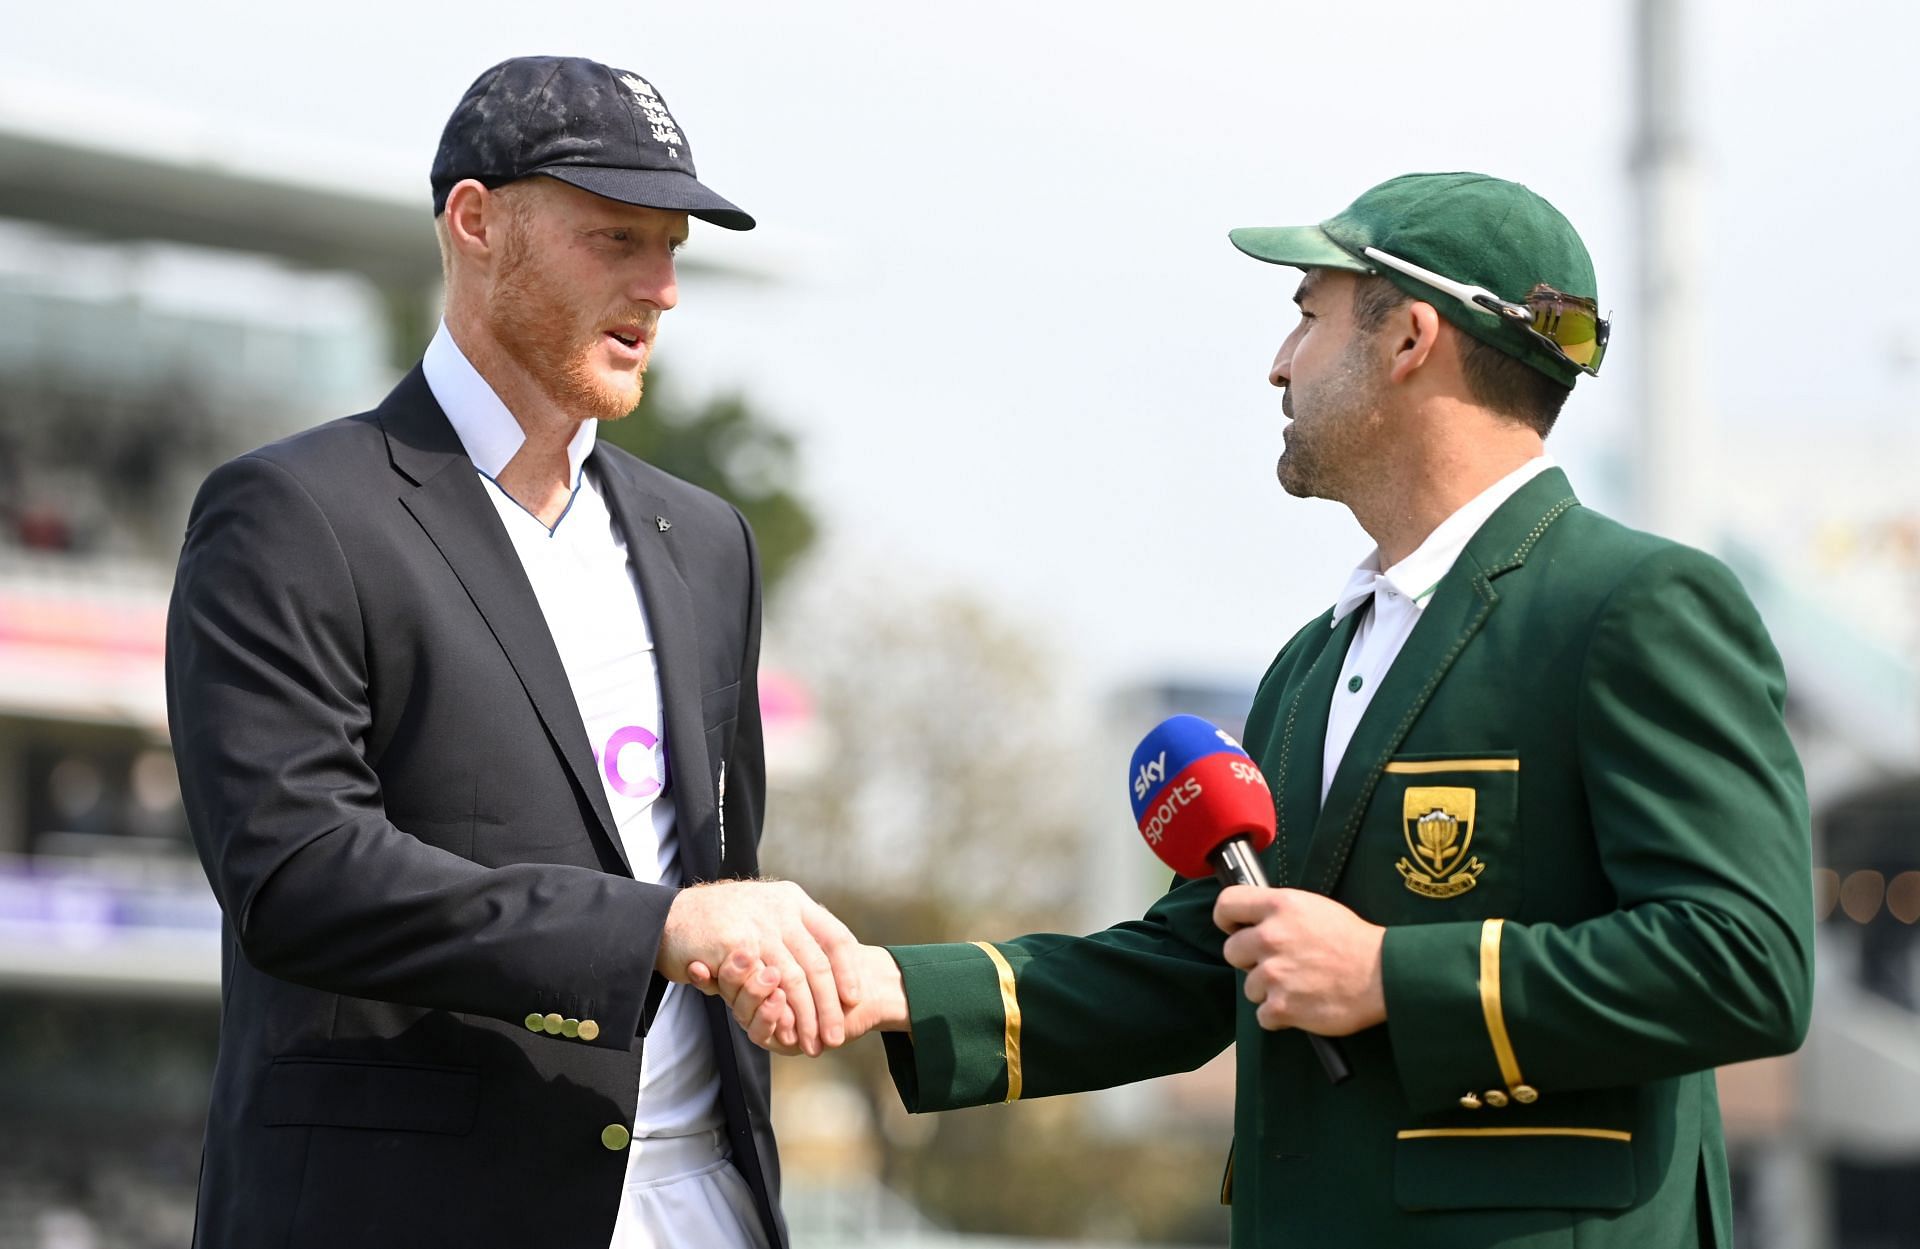 England v South Africa - First LV= Insurance Test Match: Day One